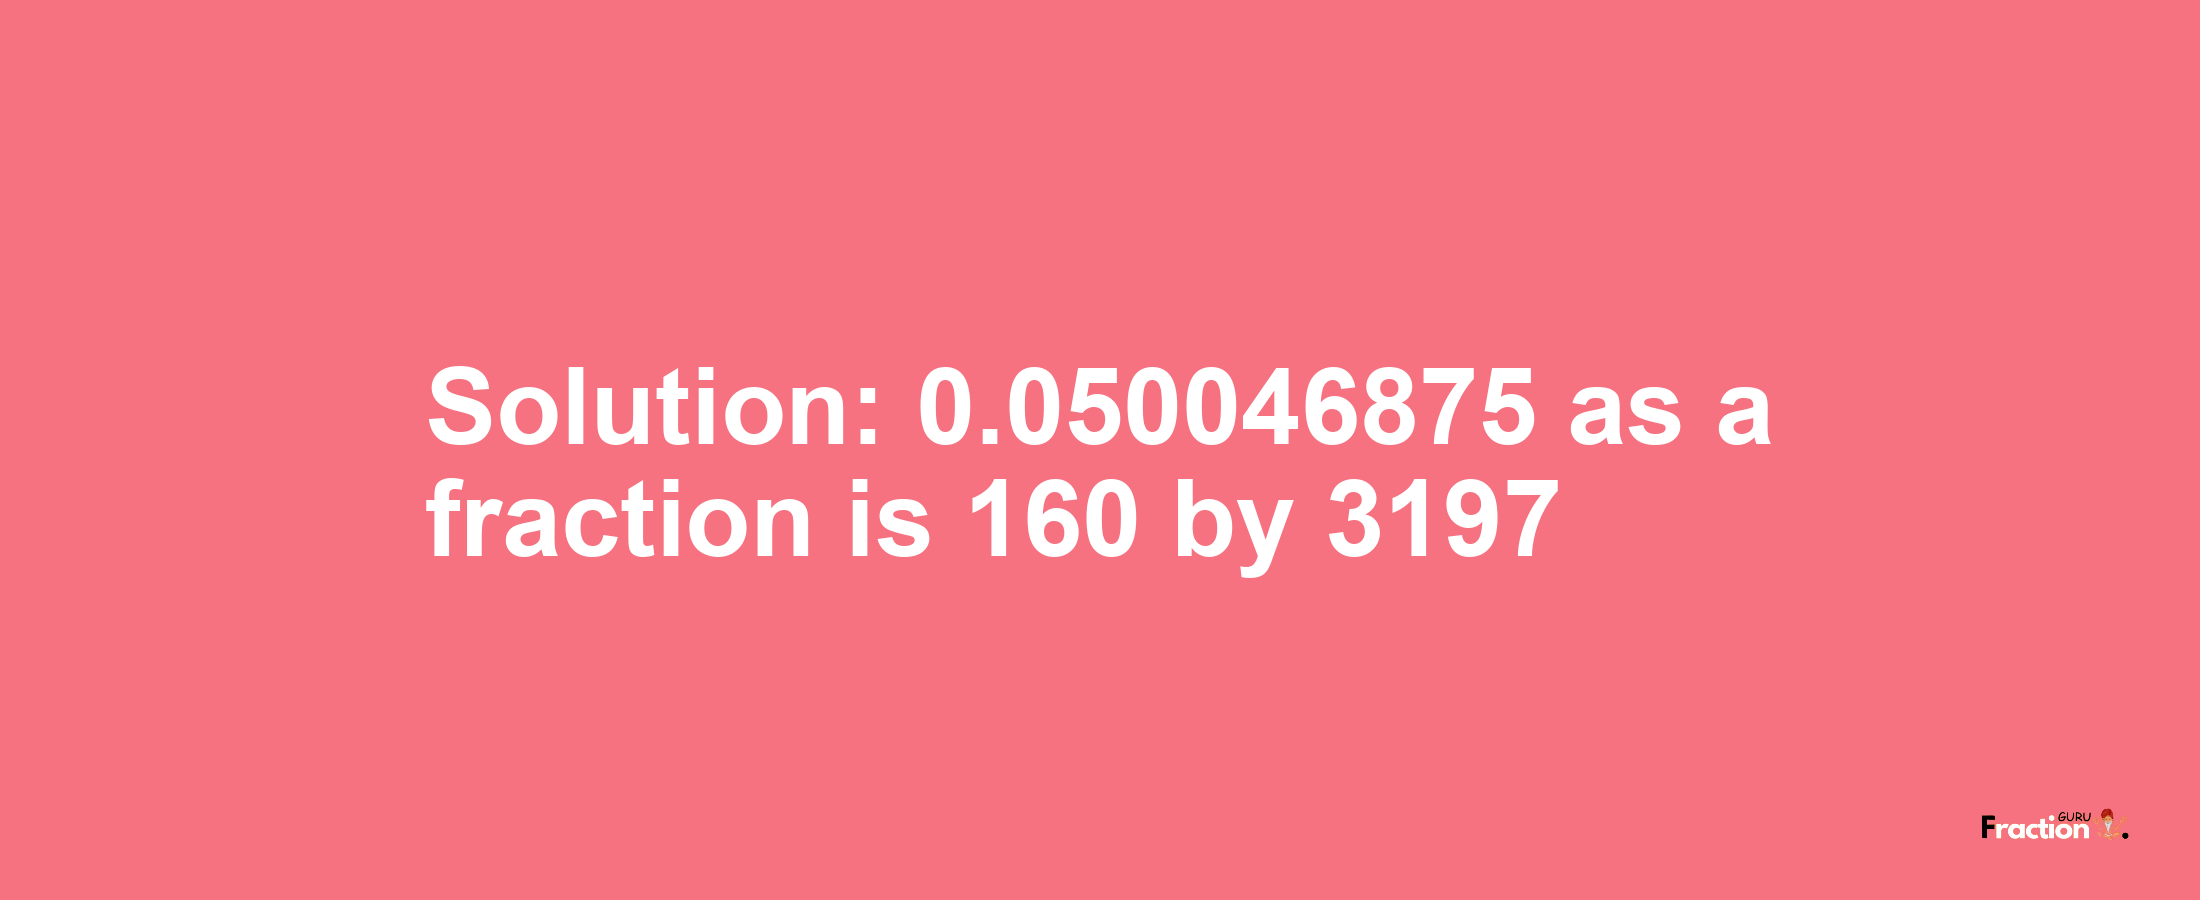 Solution:0.050046875 as a fraction is 160/3197